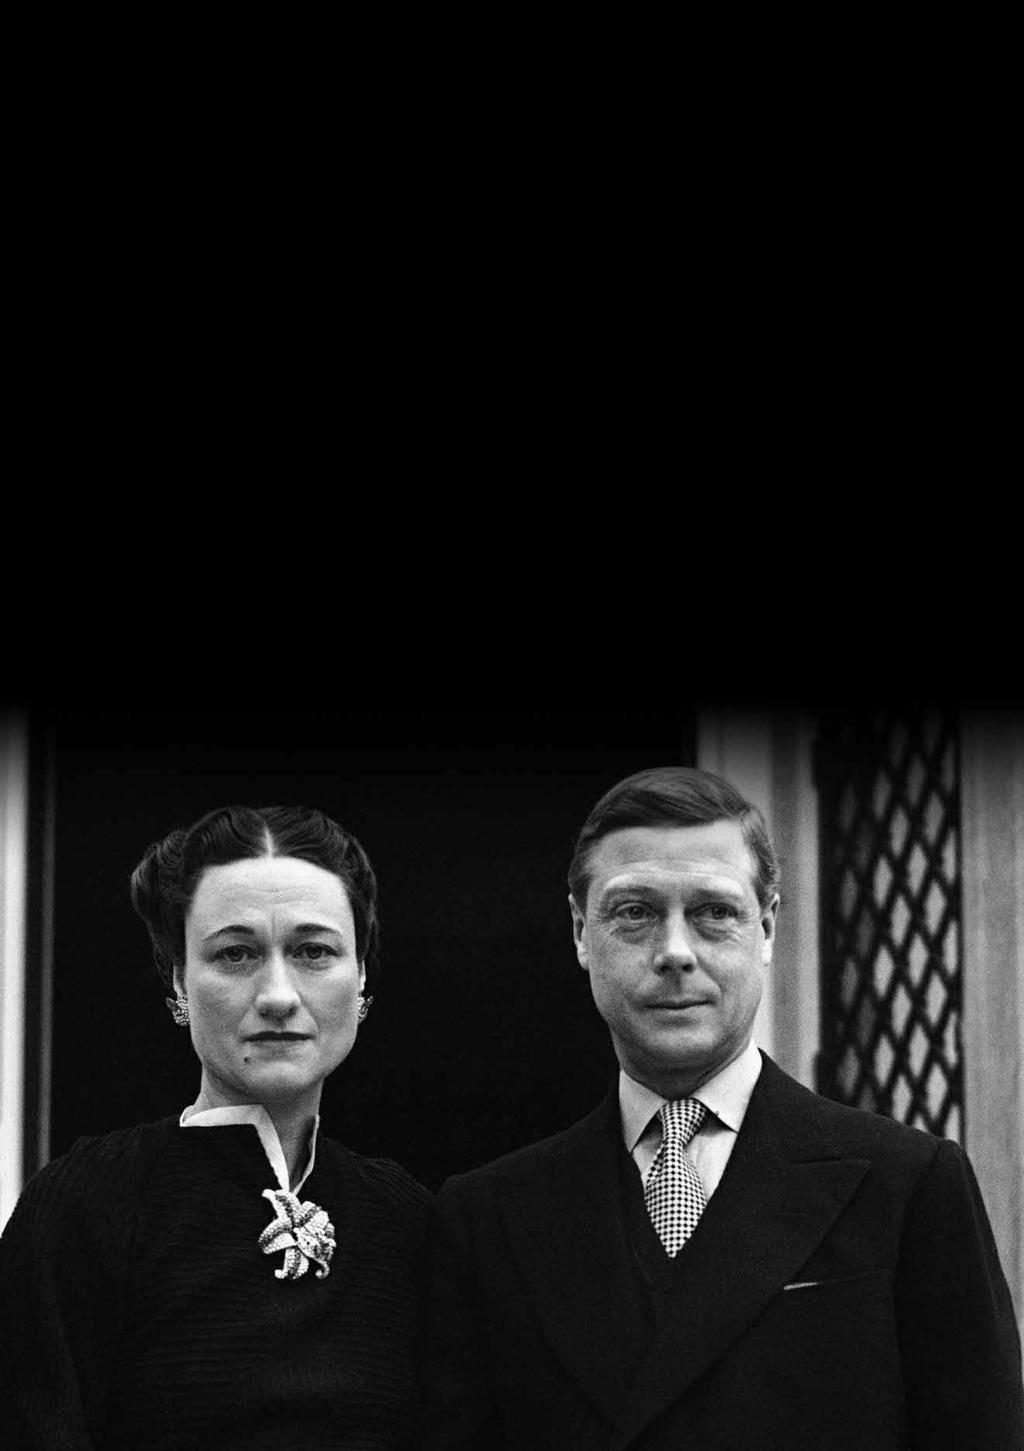 Constitution in Crisis? (Polesden Lacey) On 11 December 1936, Edward VIII broadcast to the nation his intention to abdicate as King and Emperor.